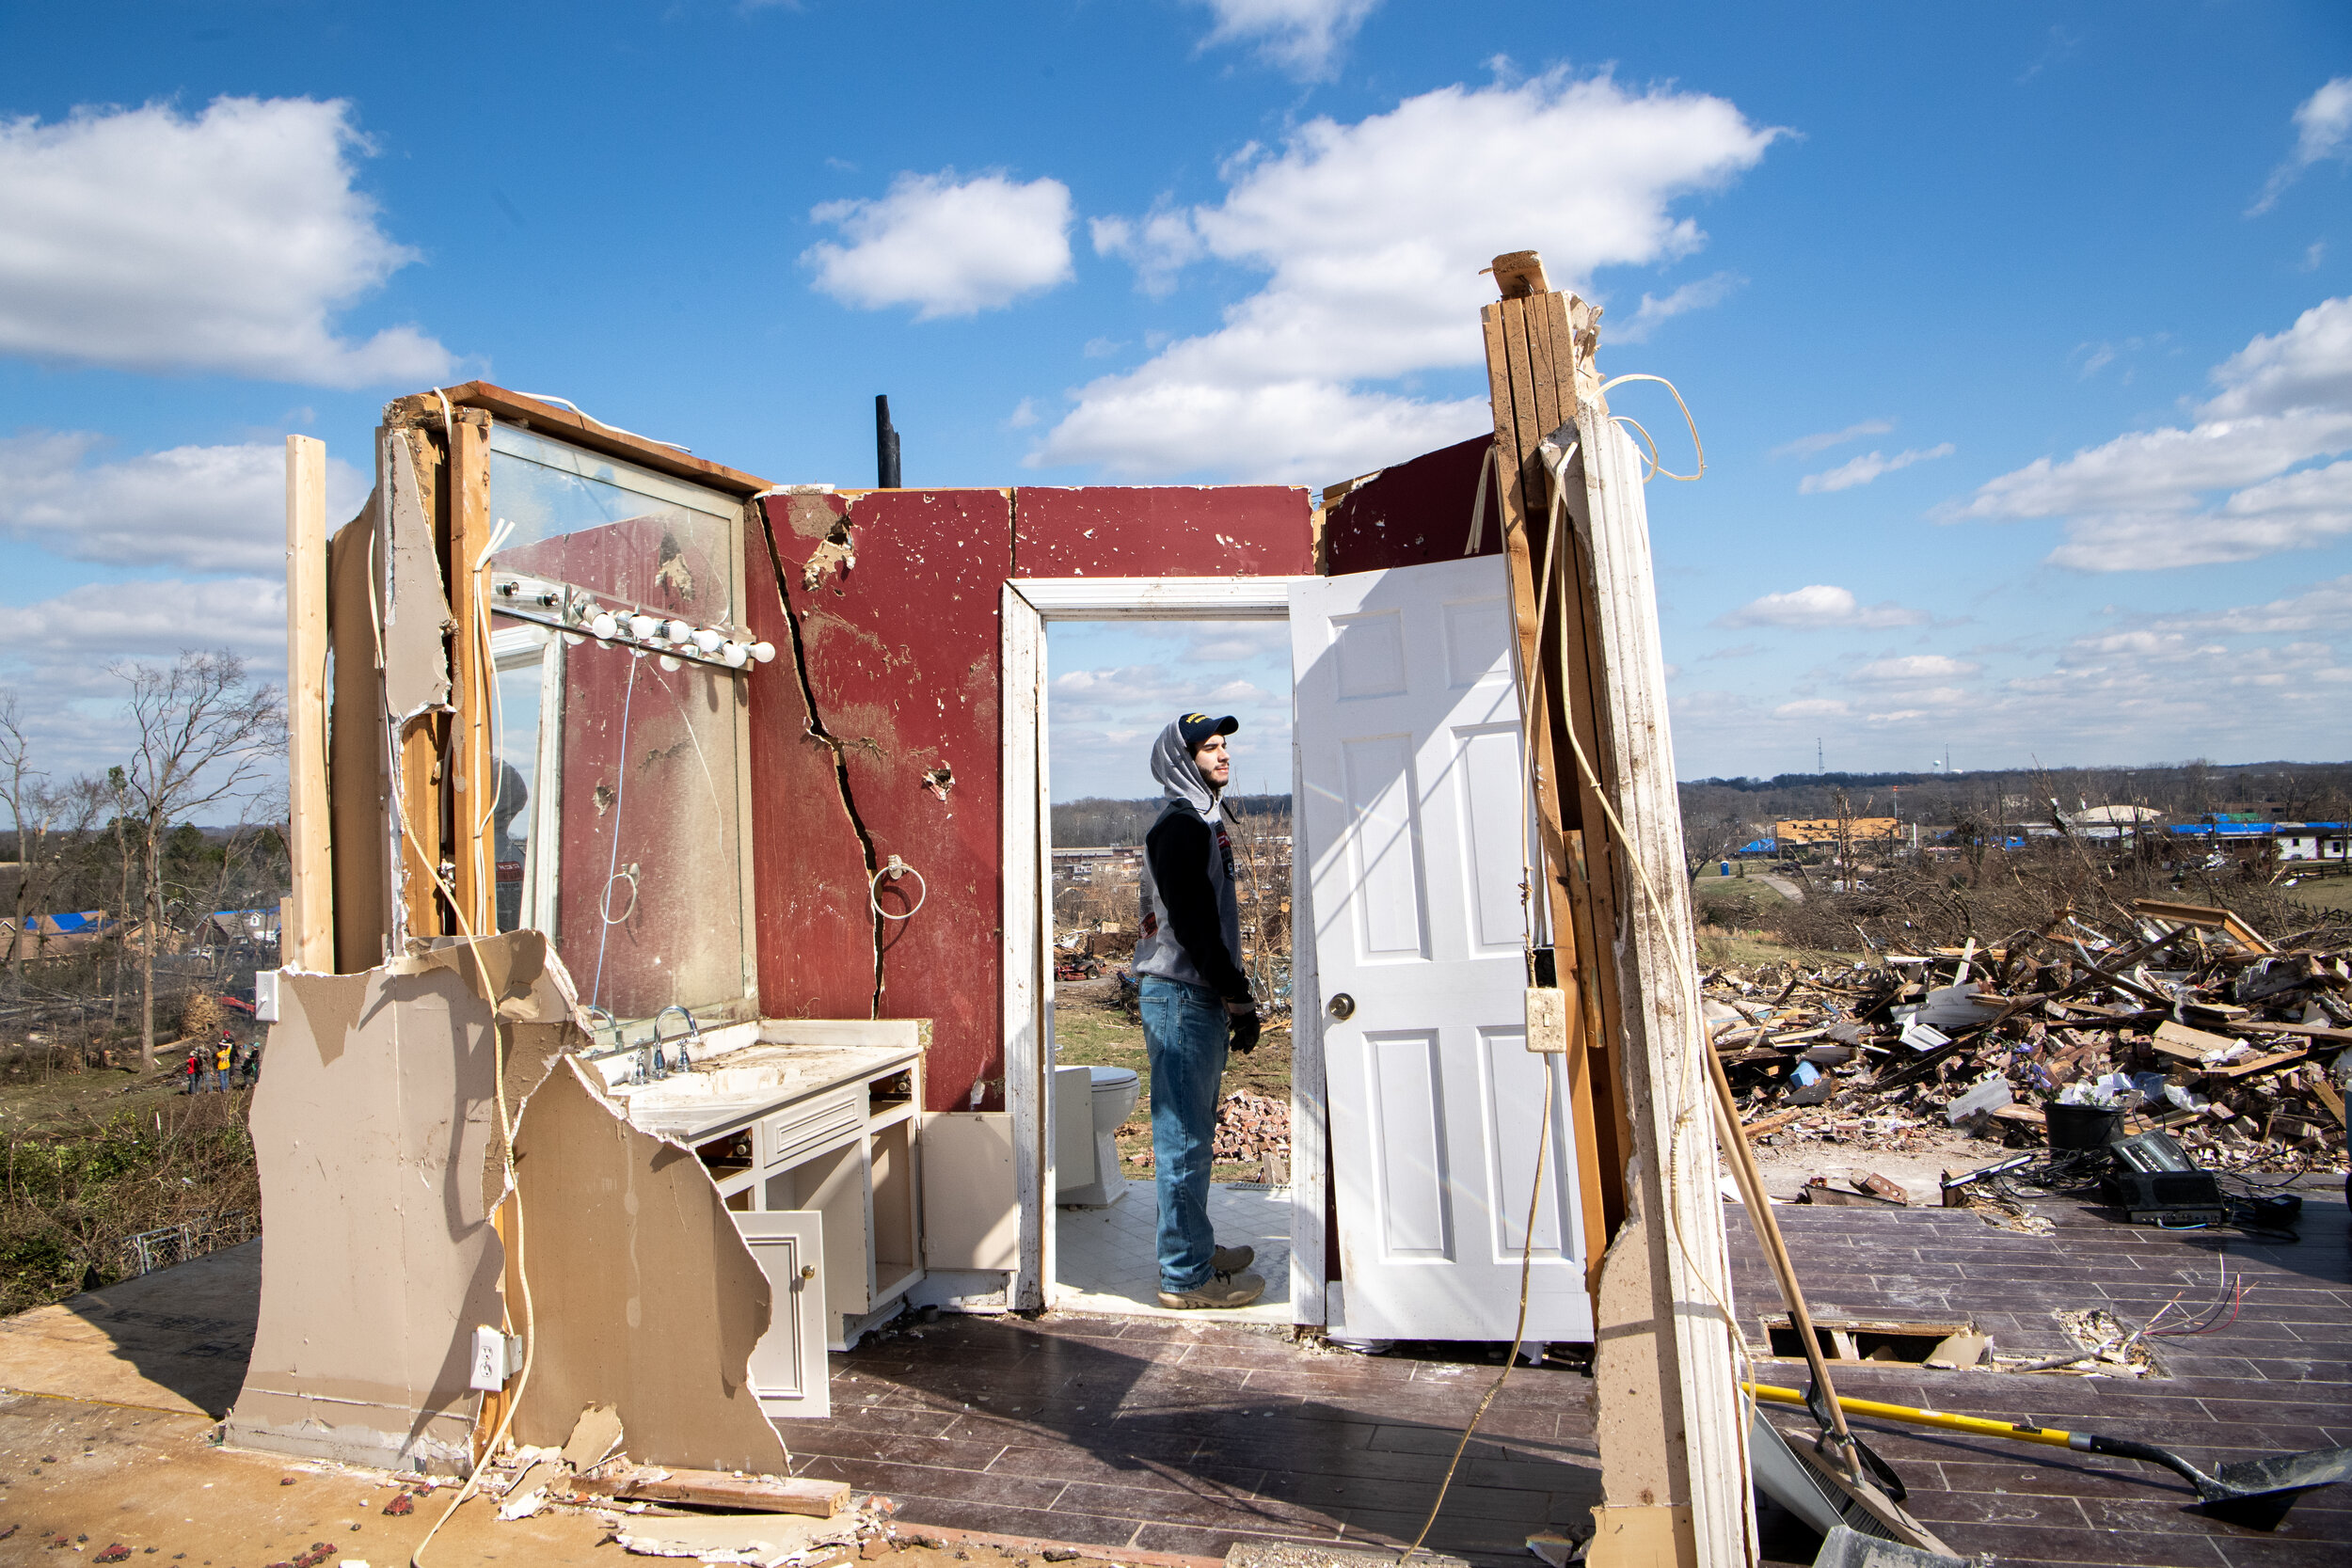  Mark Broekhuizen, 17, walks through the remains of Ken Gluck's house in Mt. Juliet, Tenn., on Friday, March 6, 2020. The walls are the only ones left standing following the tornado that ripped through Middle Tennessee and is where Gluck hid during t